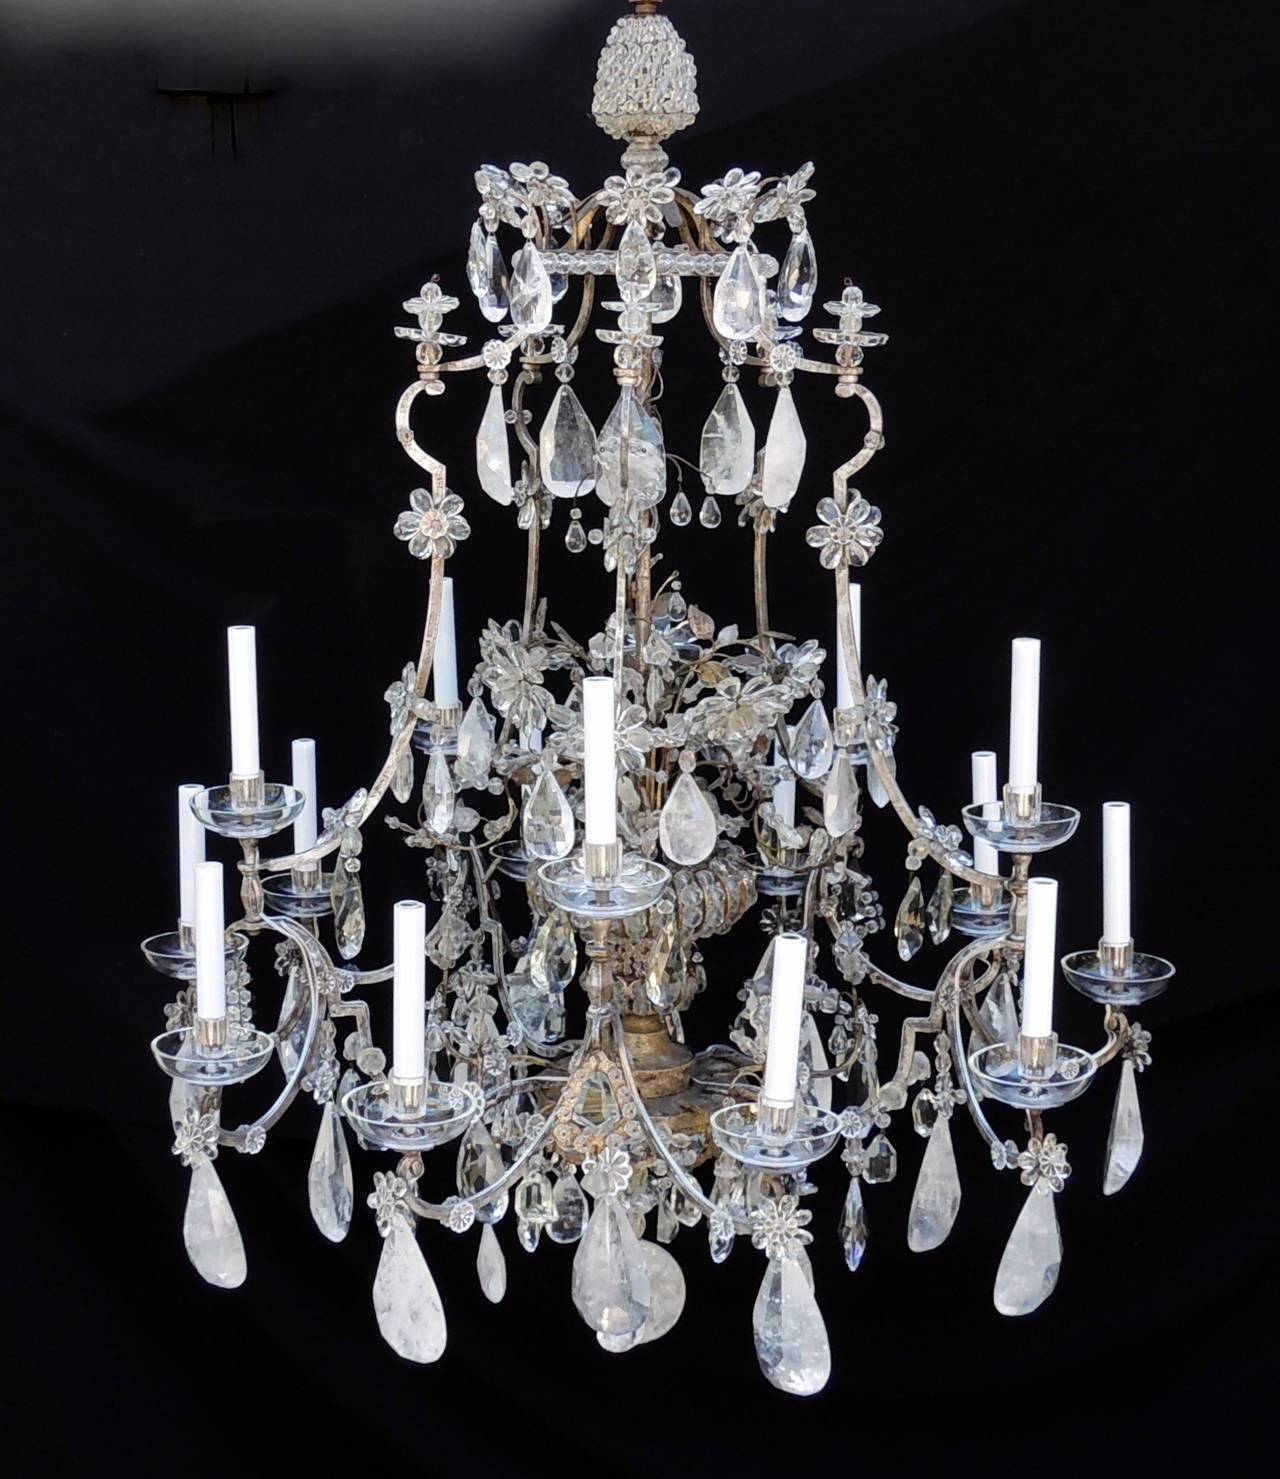 This incredible original 1920s, Maison Baguès silvered gilt chandelier has fifteen-lights on two-tiers surrounding a crystal beaded urn centre. The top is decorated with a full crystal beaded acorn, a beaded trimmed crown with crystal flowers and